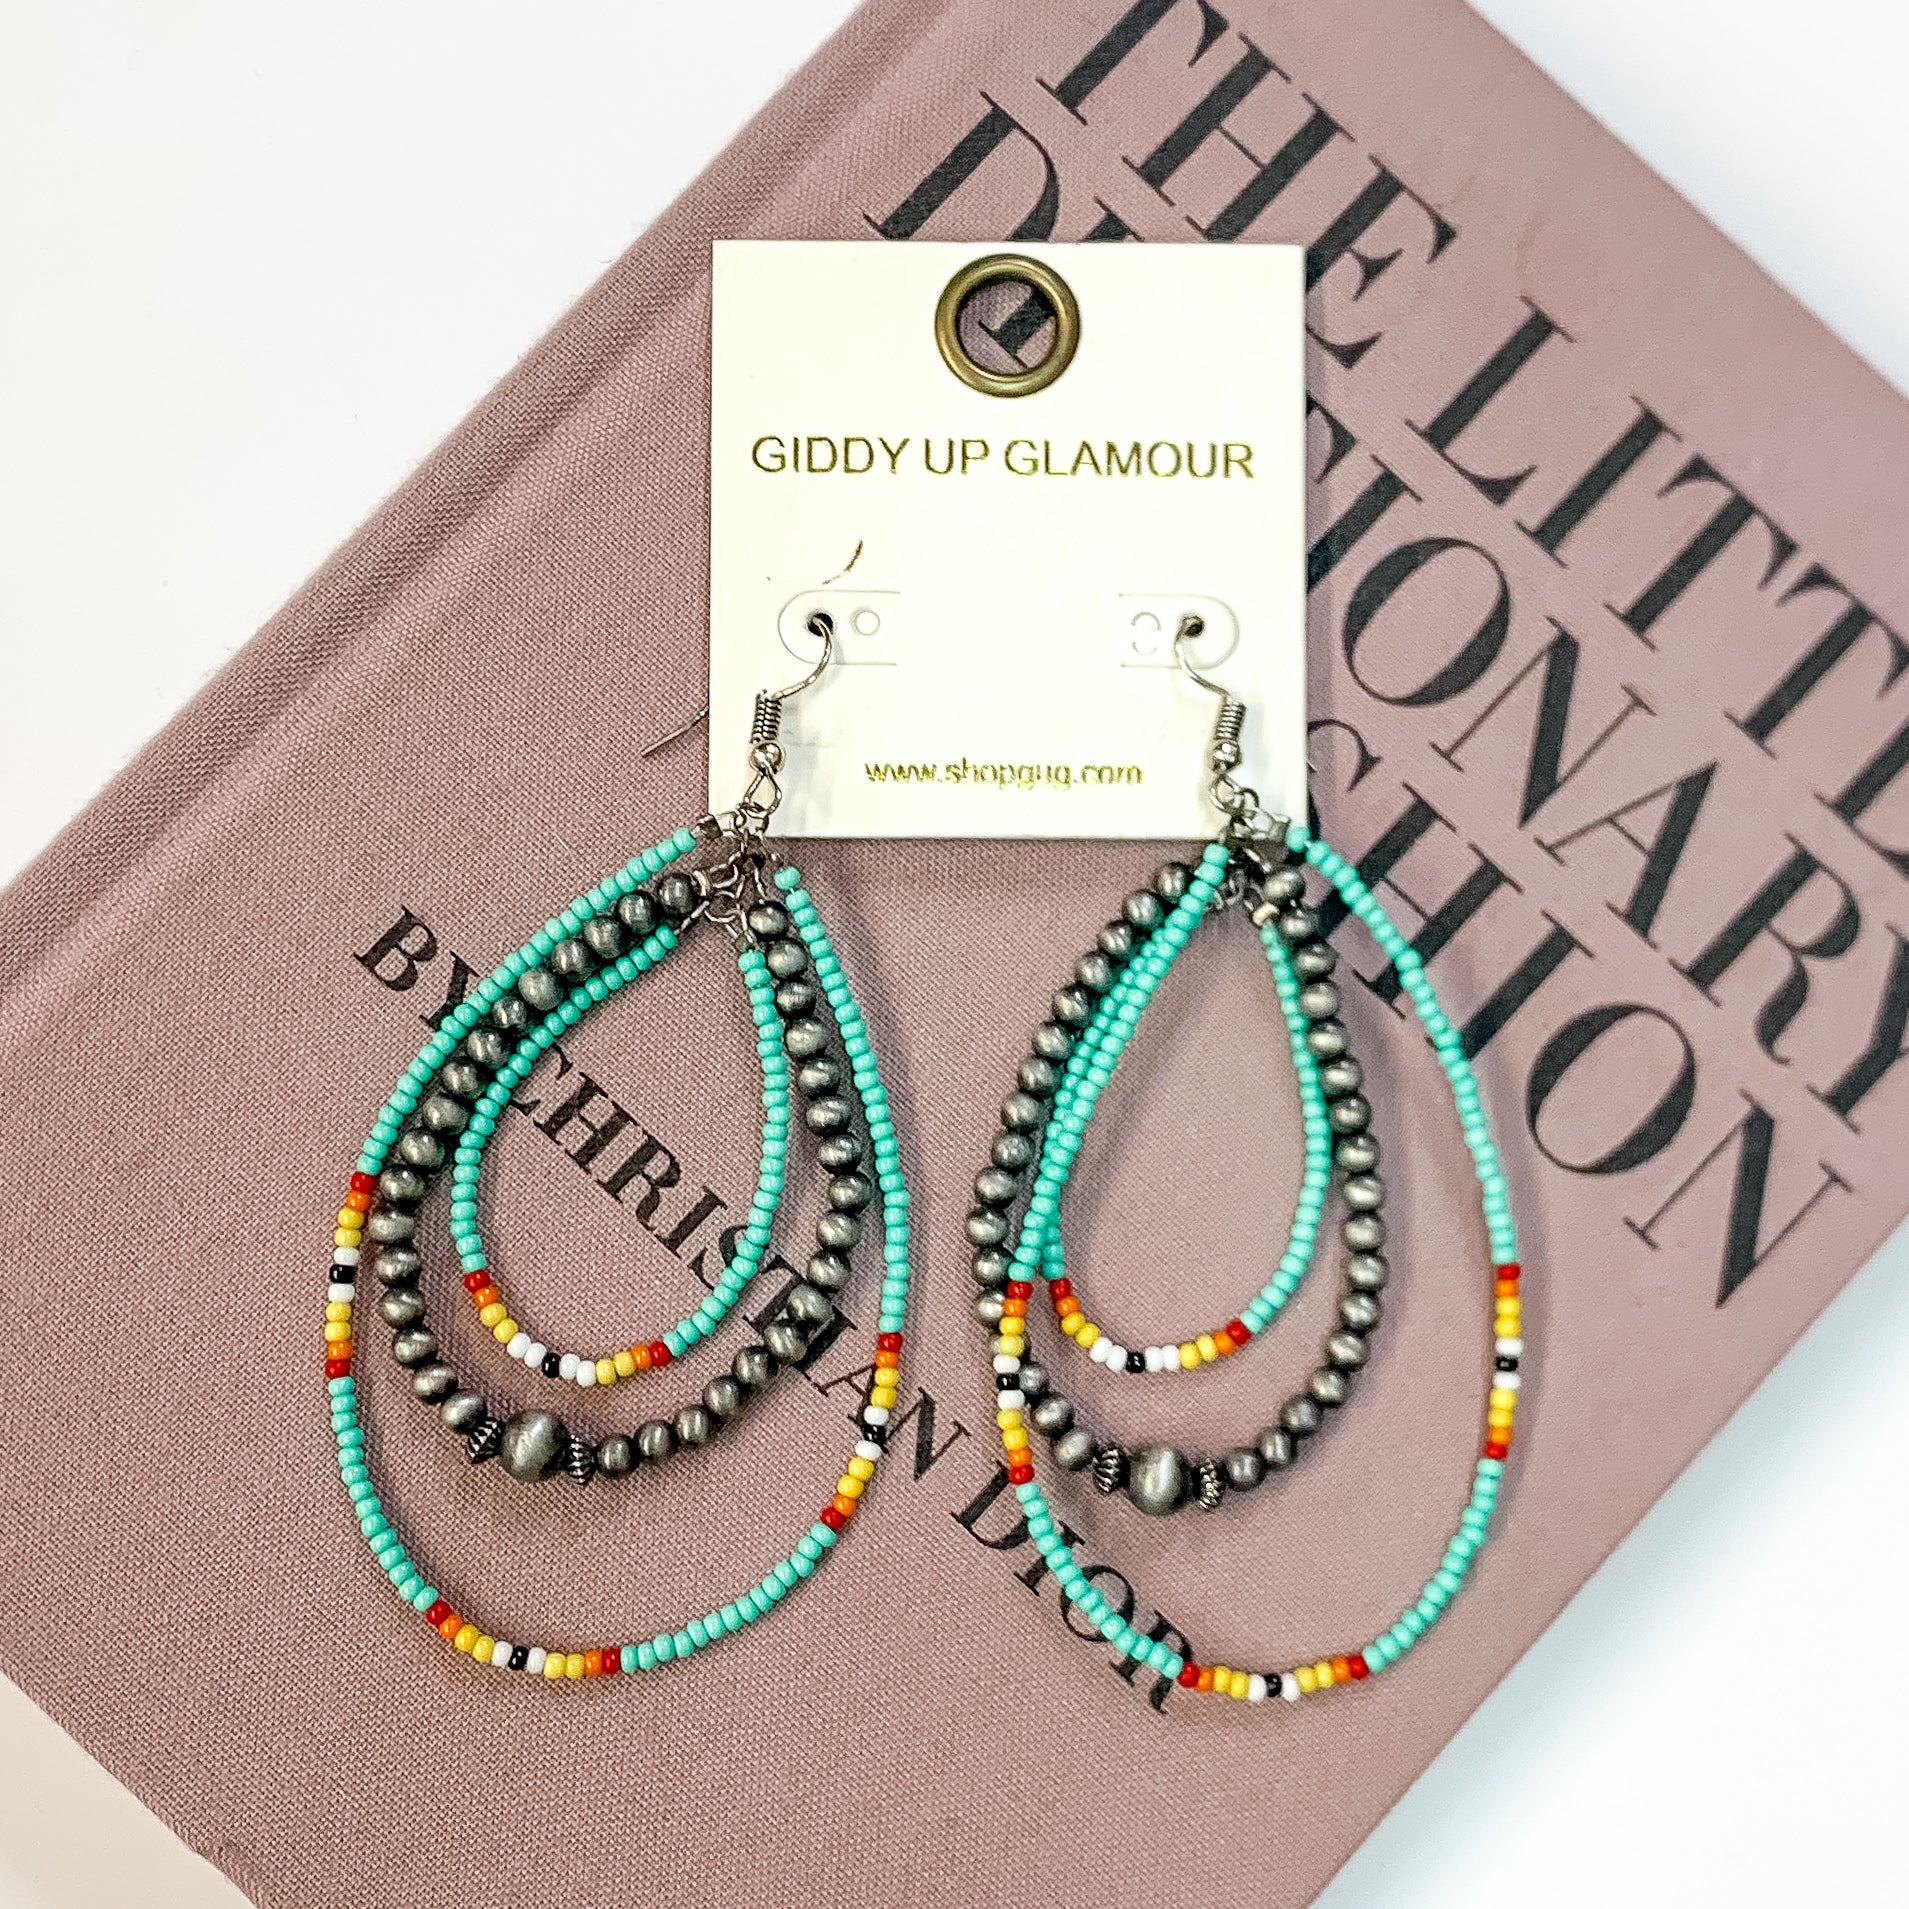 Aztec Seed Beaded Teardrop Earrings with Faux Navajo Beads in Turquoise Green - Giddy Up Glamour Boutique